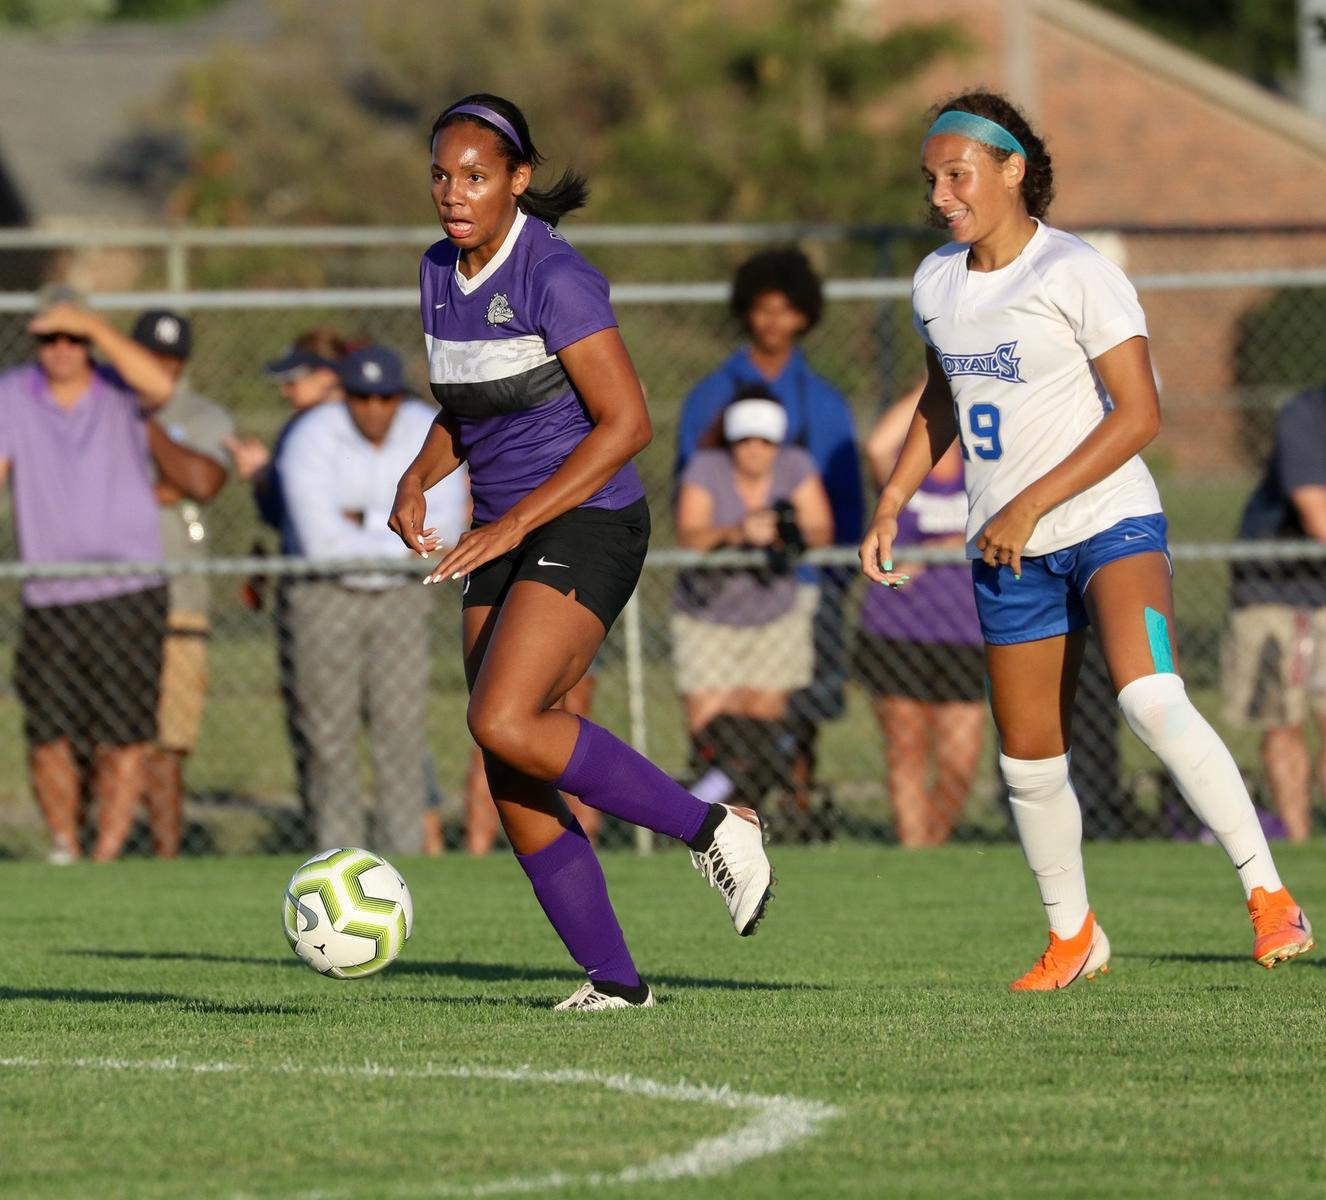 @bhsdogs_gsoccer to face No. 6 Center Grove and Westfield this week